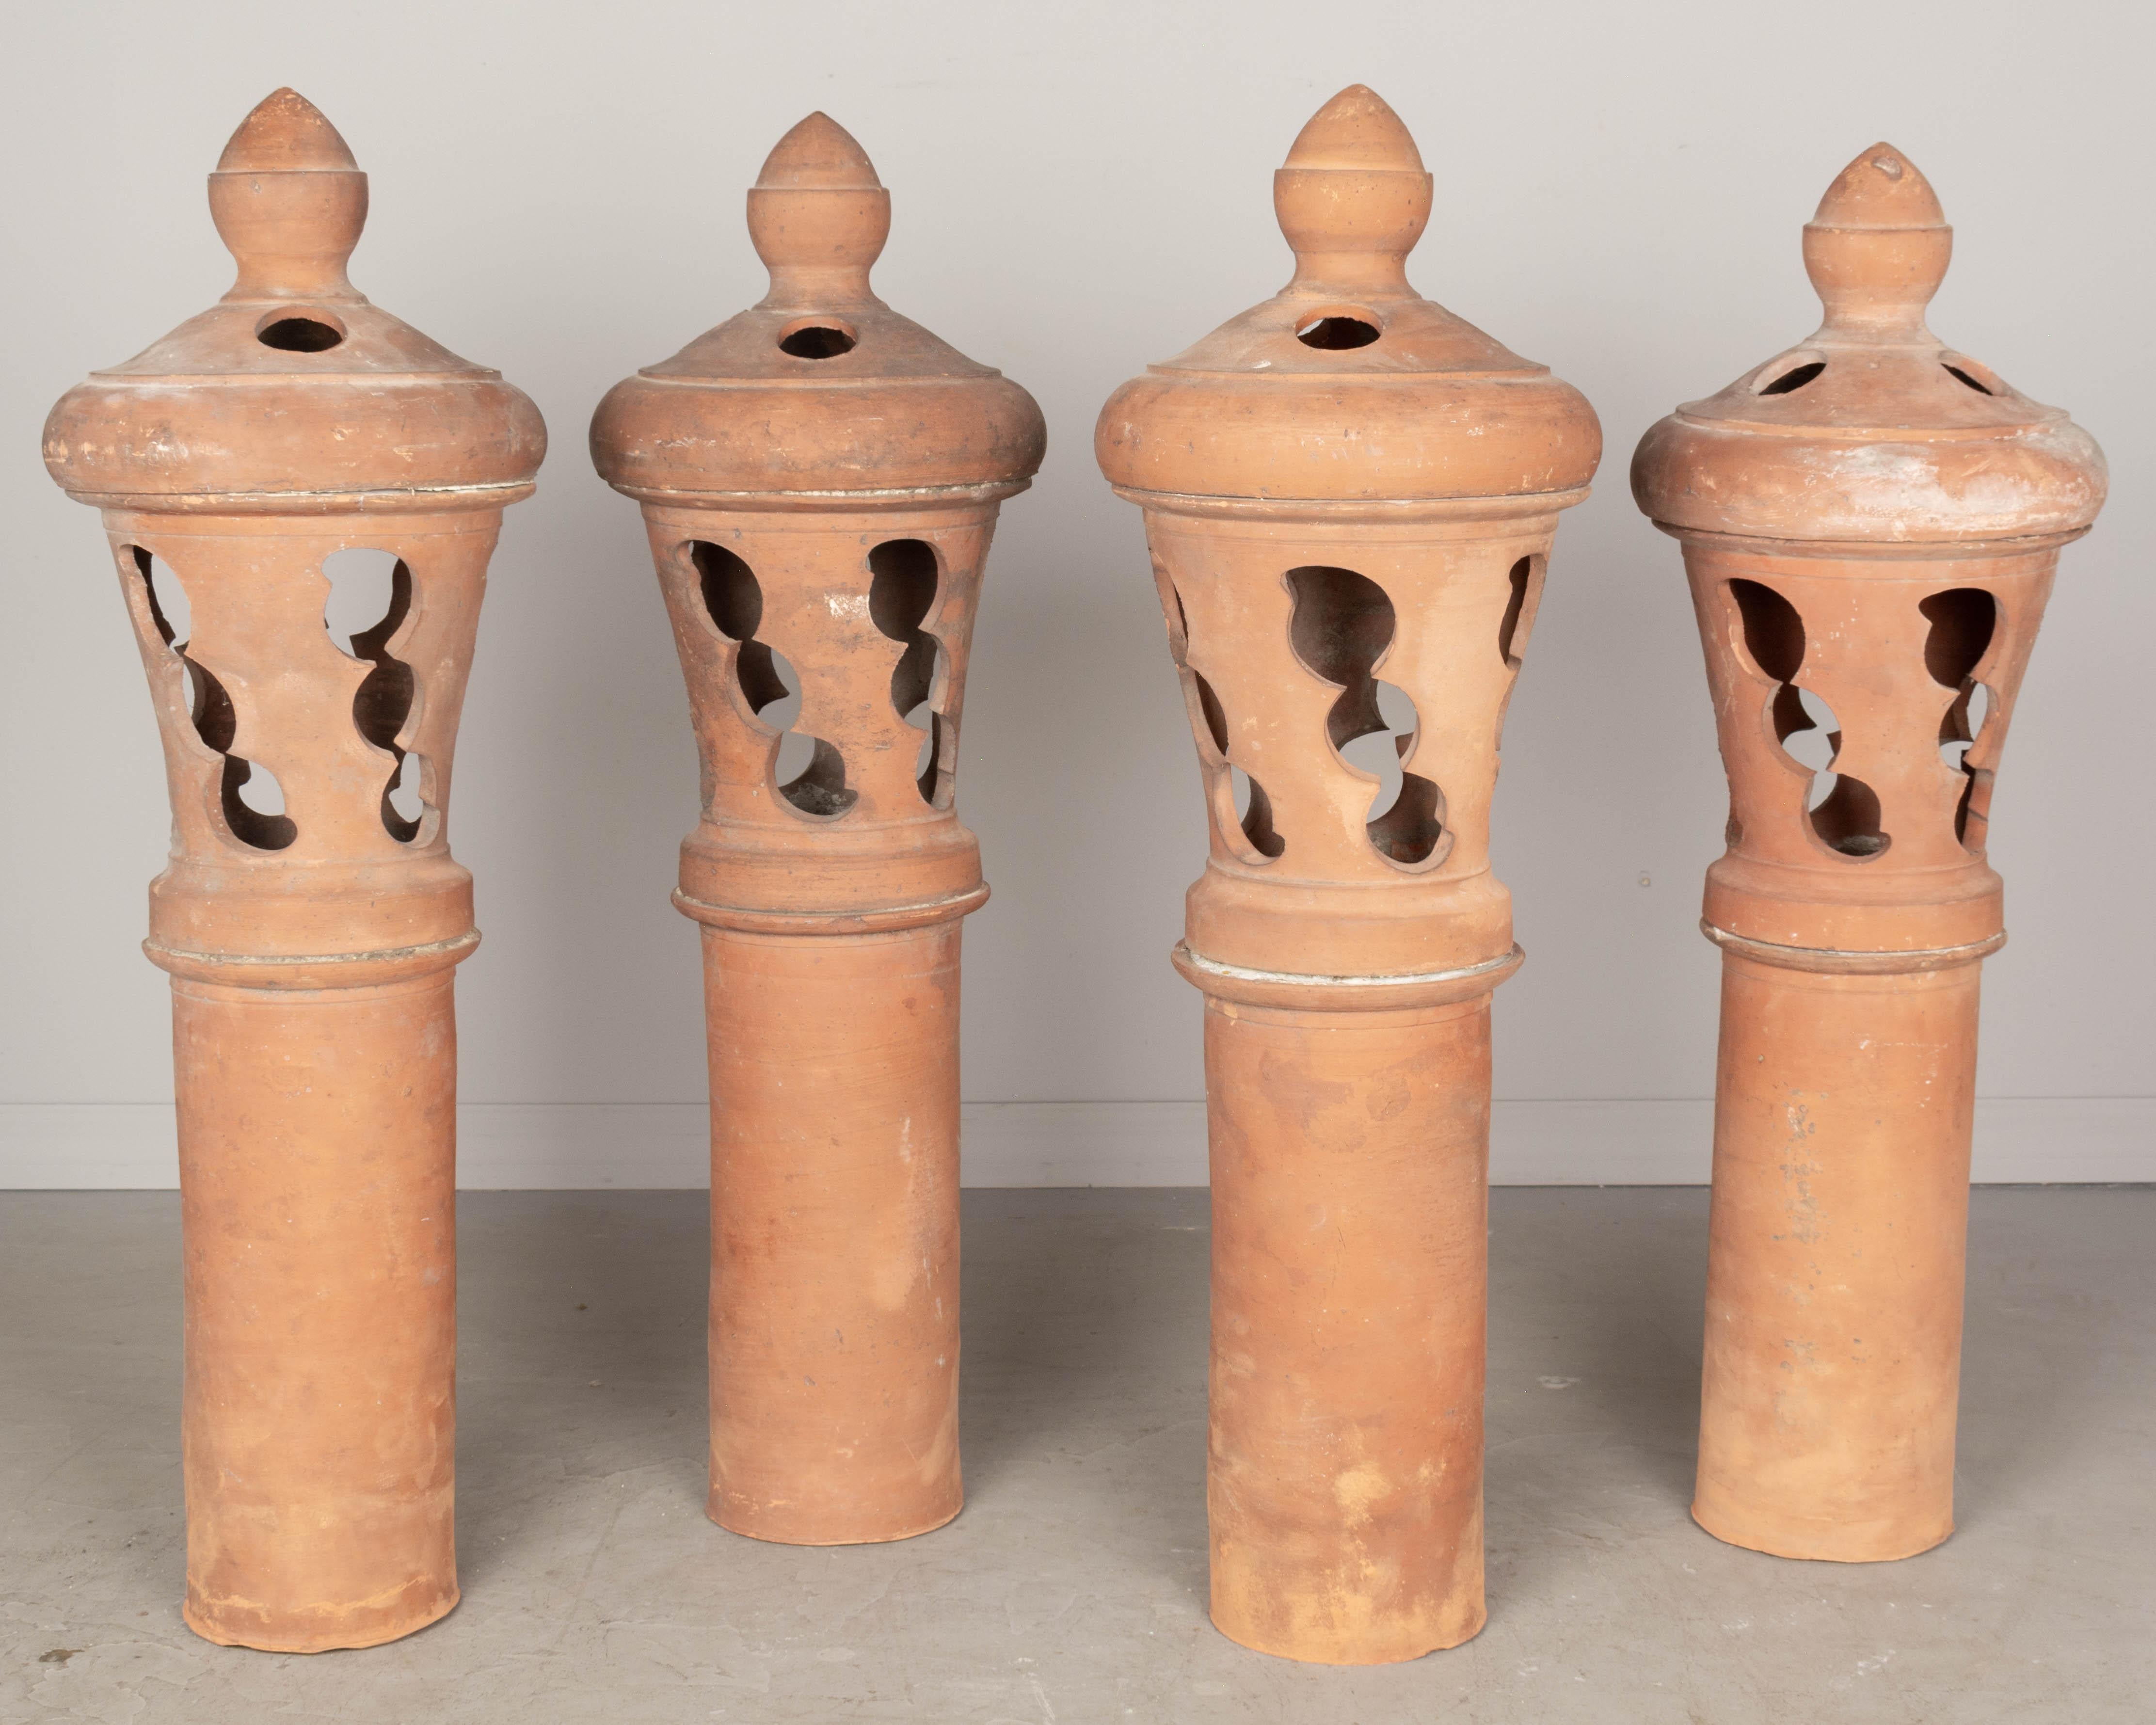 A set of four large French terracotta chimney roof vents. Each in three parts with tall column, decorative cut-out vents and lid with finial. Perfect for use as outdoor garden lanterns. Circa 1900s. 40